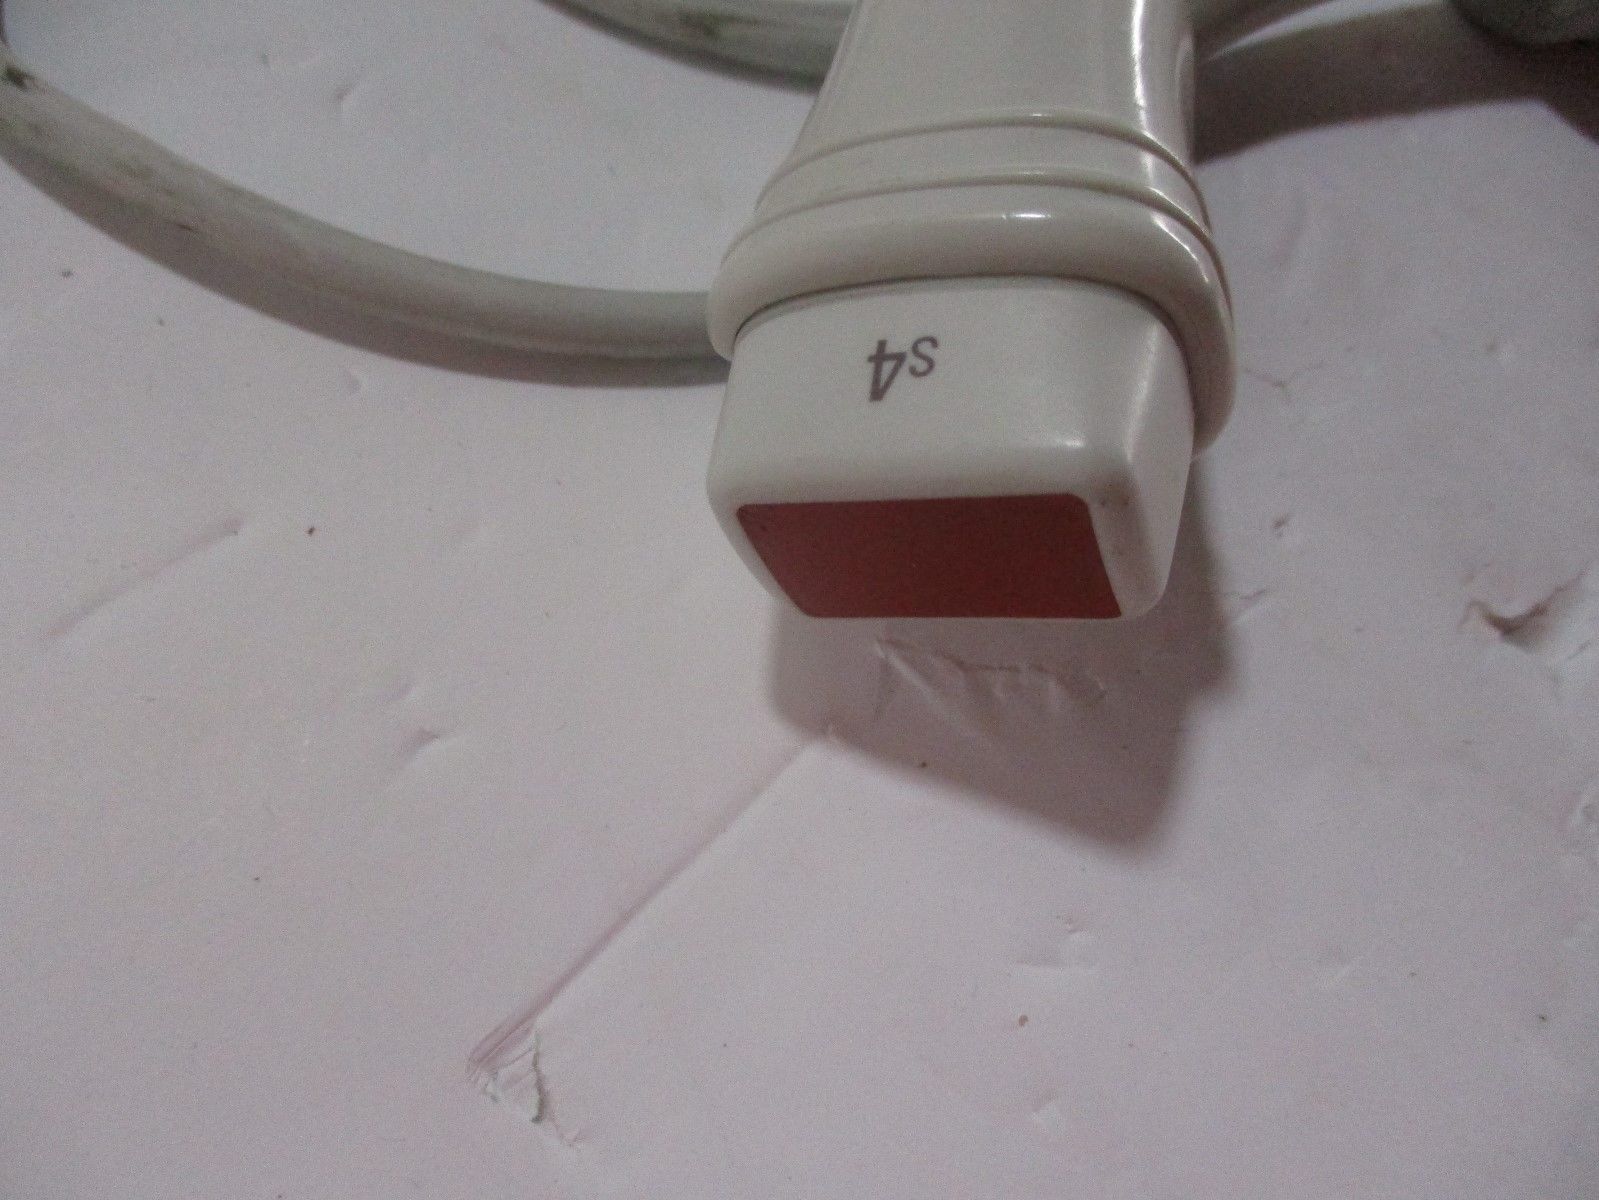 a close up of a white electrical outlet